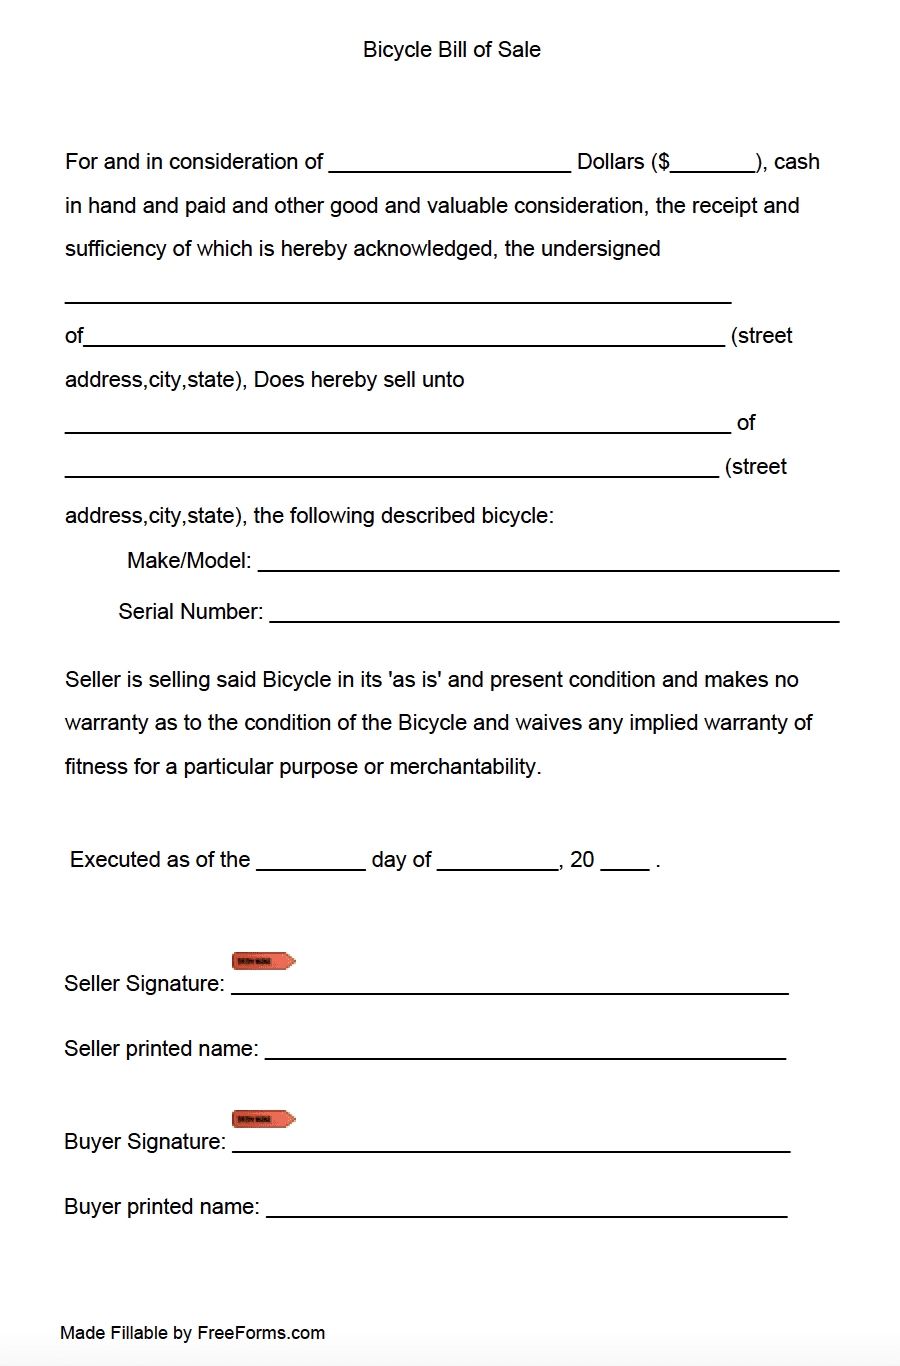 free bicycle bill of sale form pdf bill of sale with cash